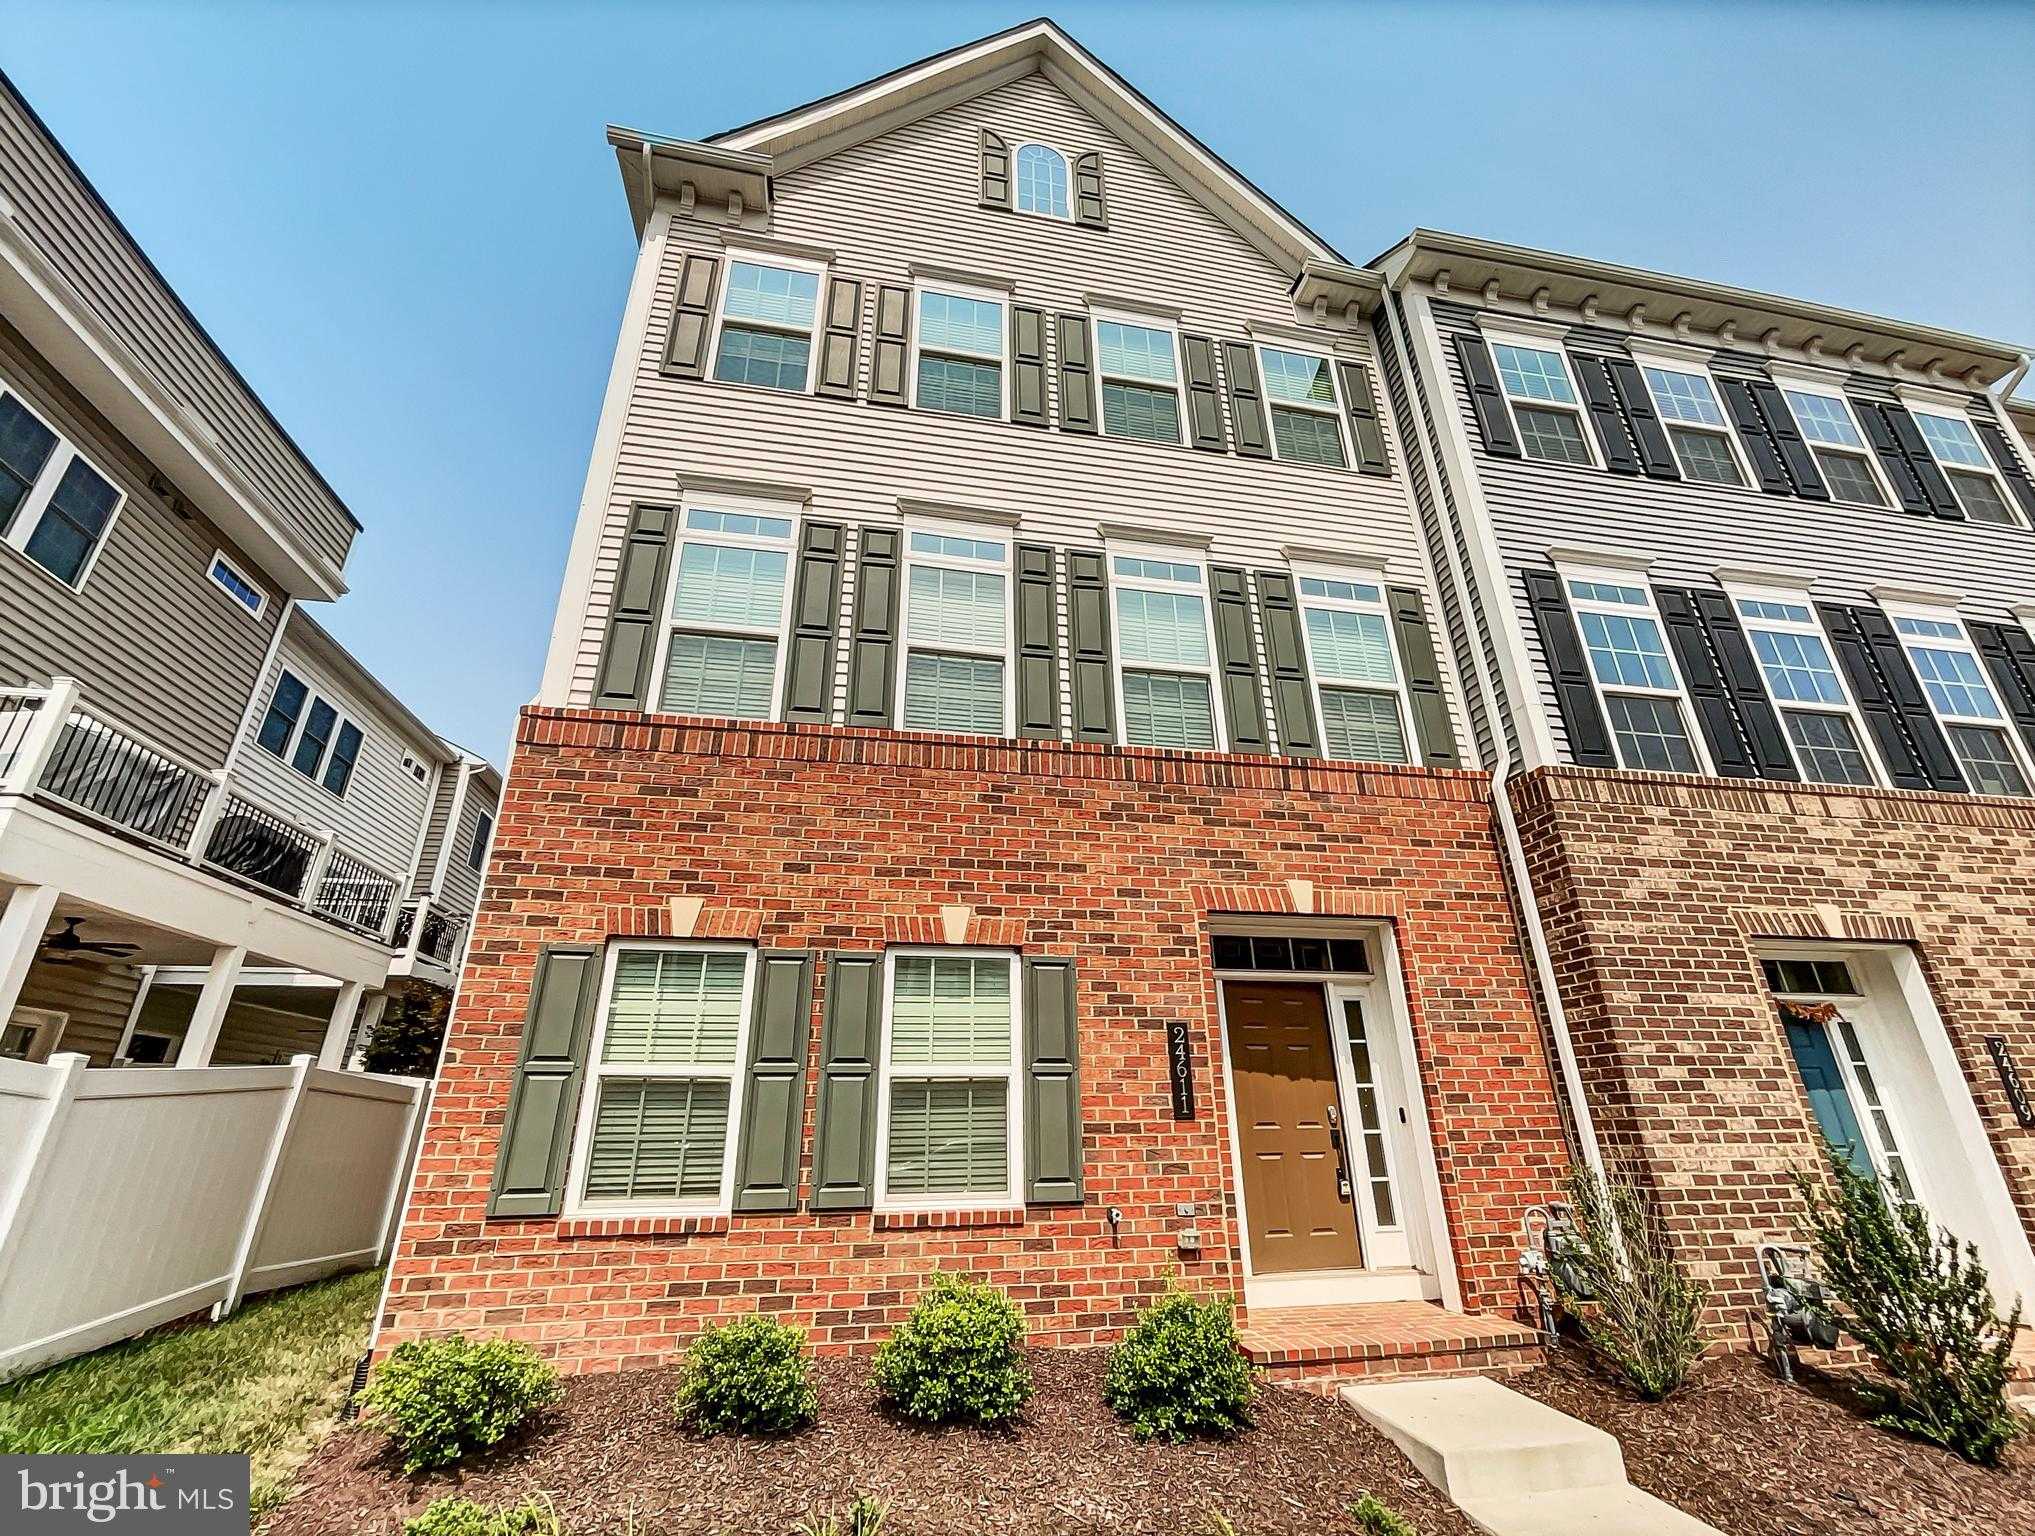 View STERLING, VA 20166 townhome